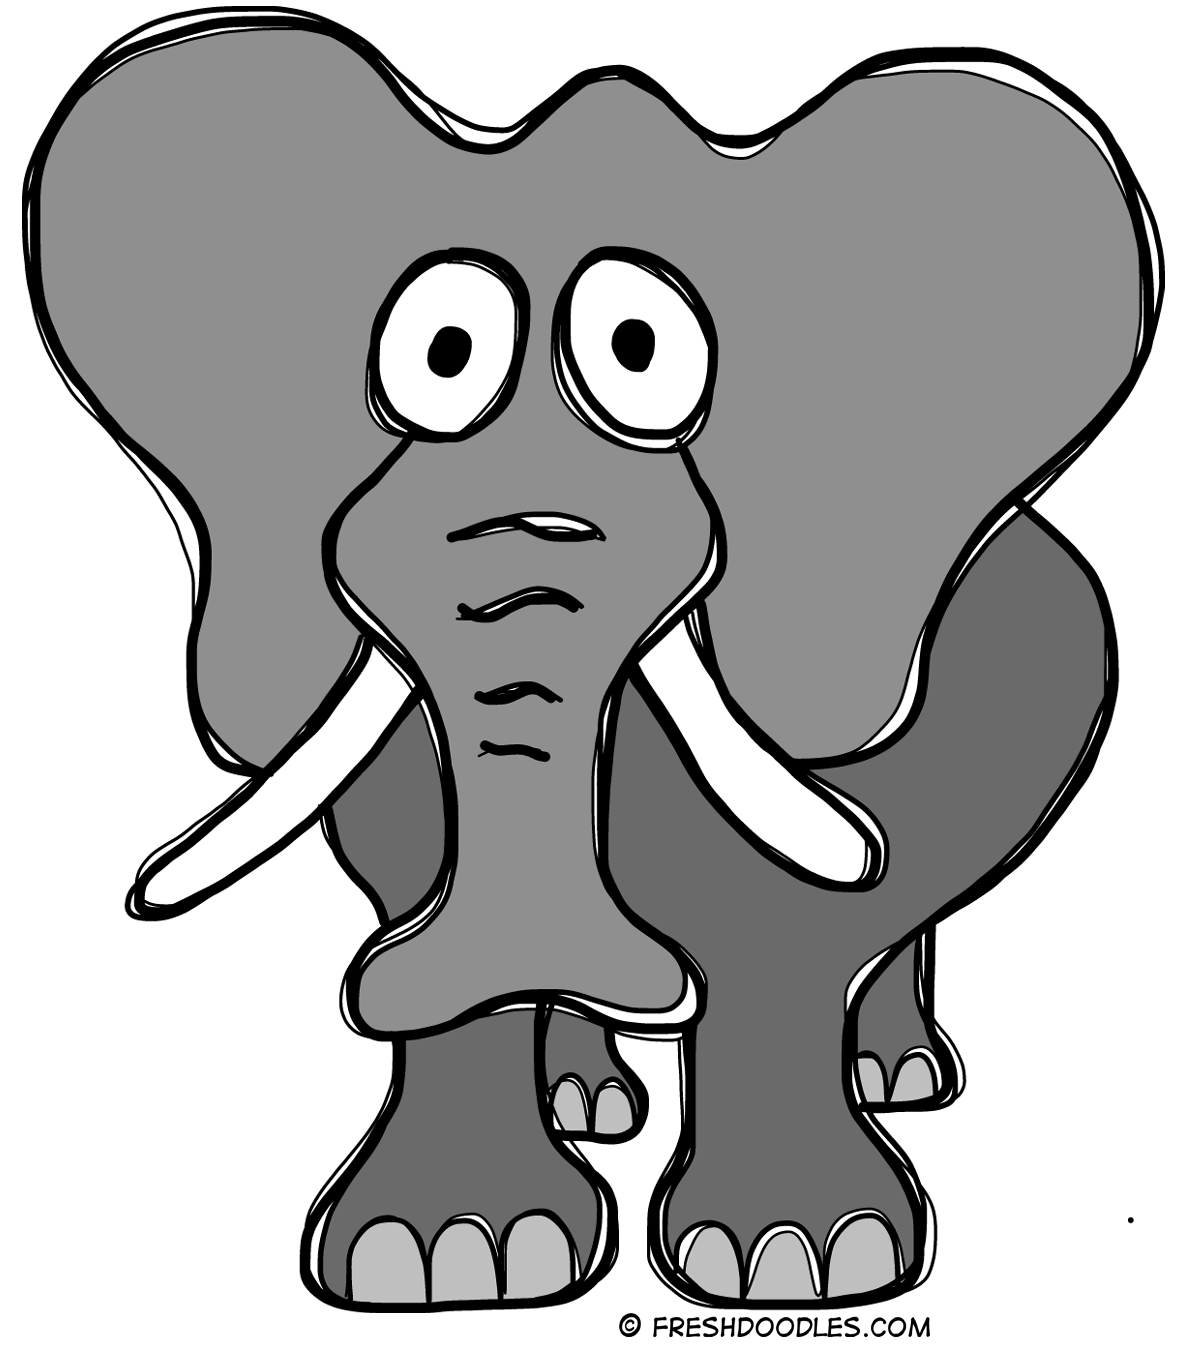 free clipart of an elephant - photo #30